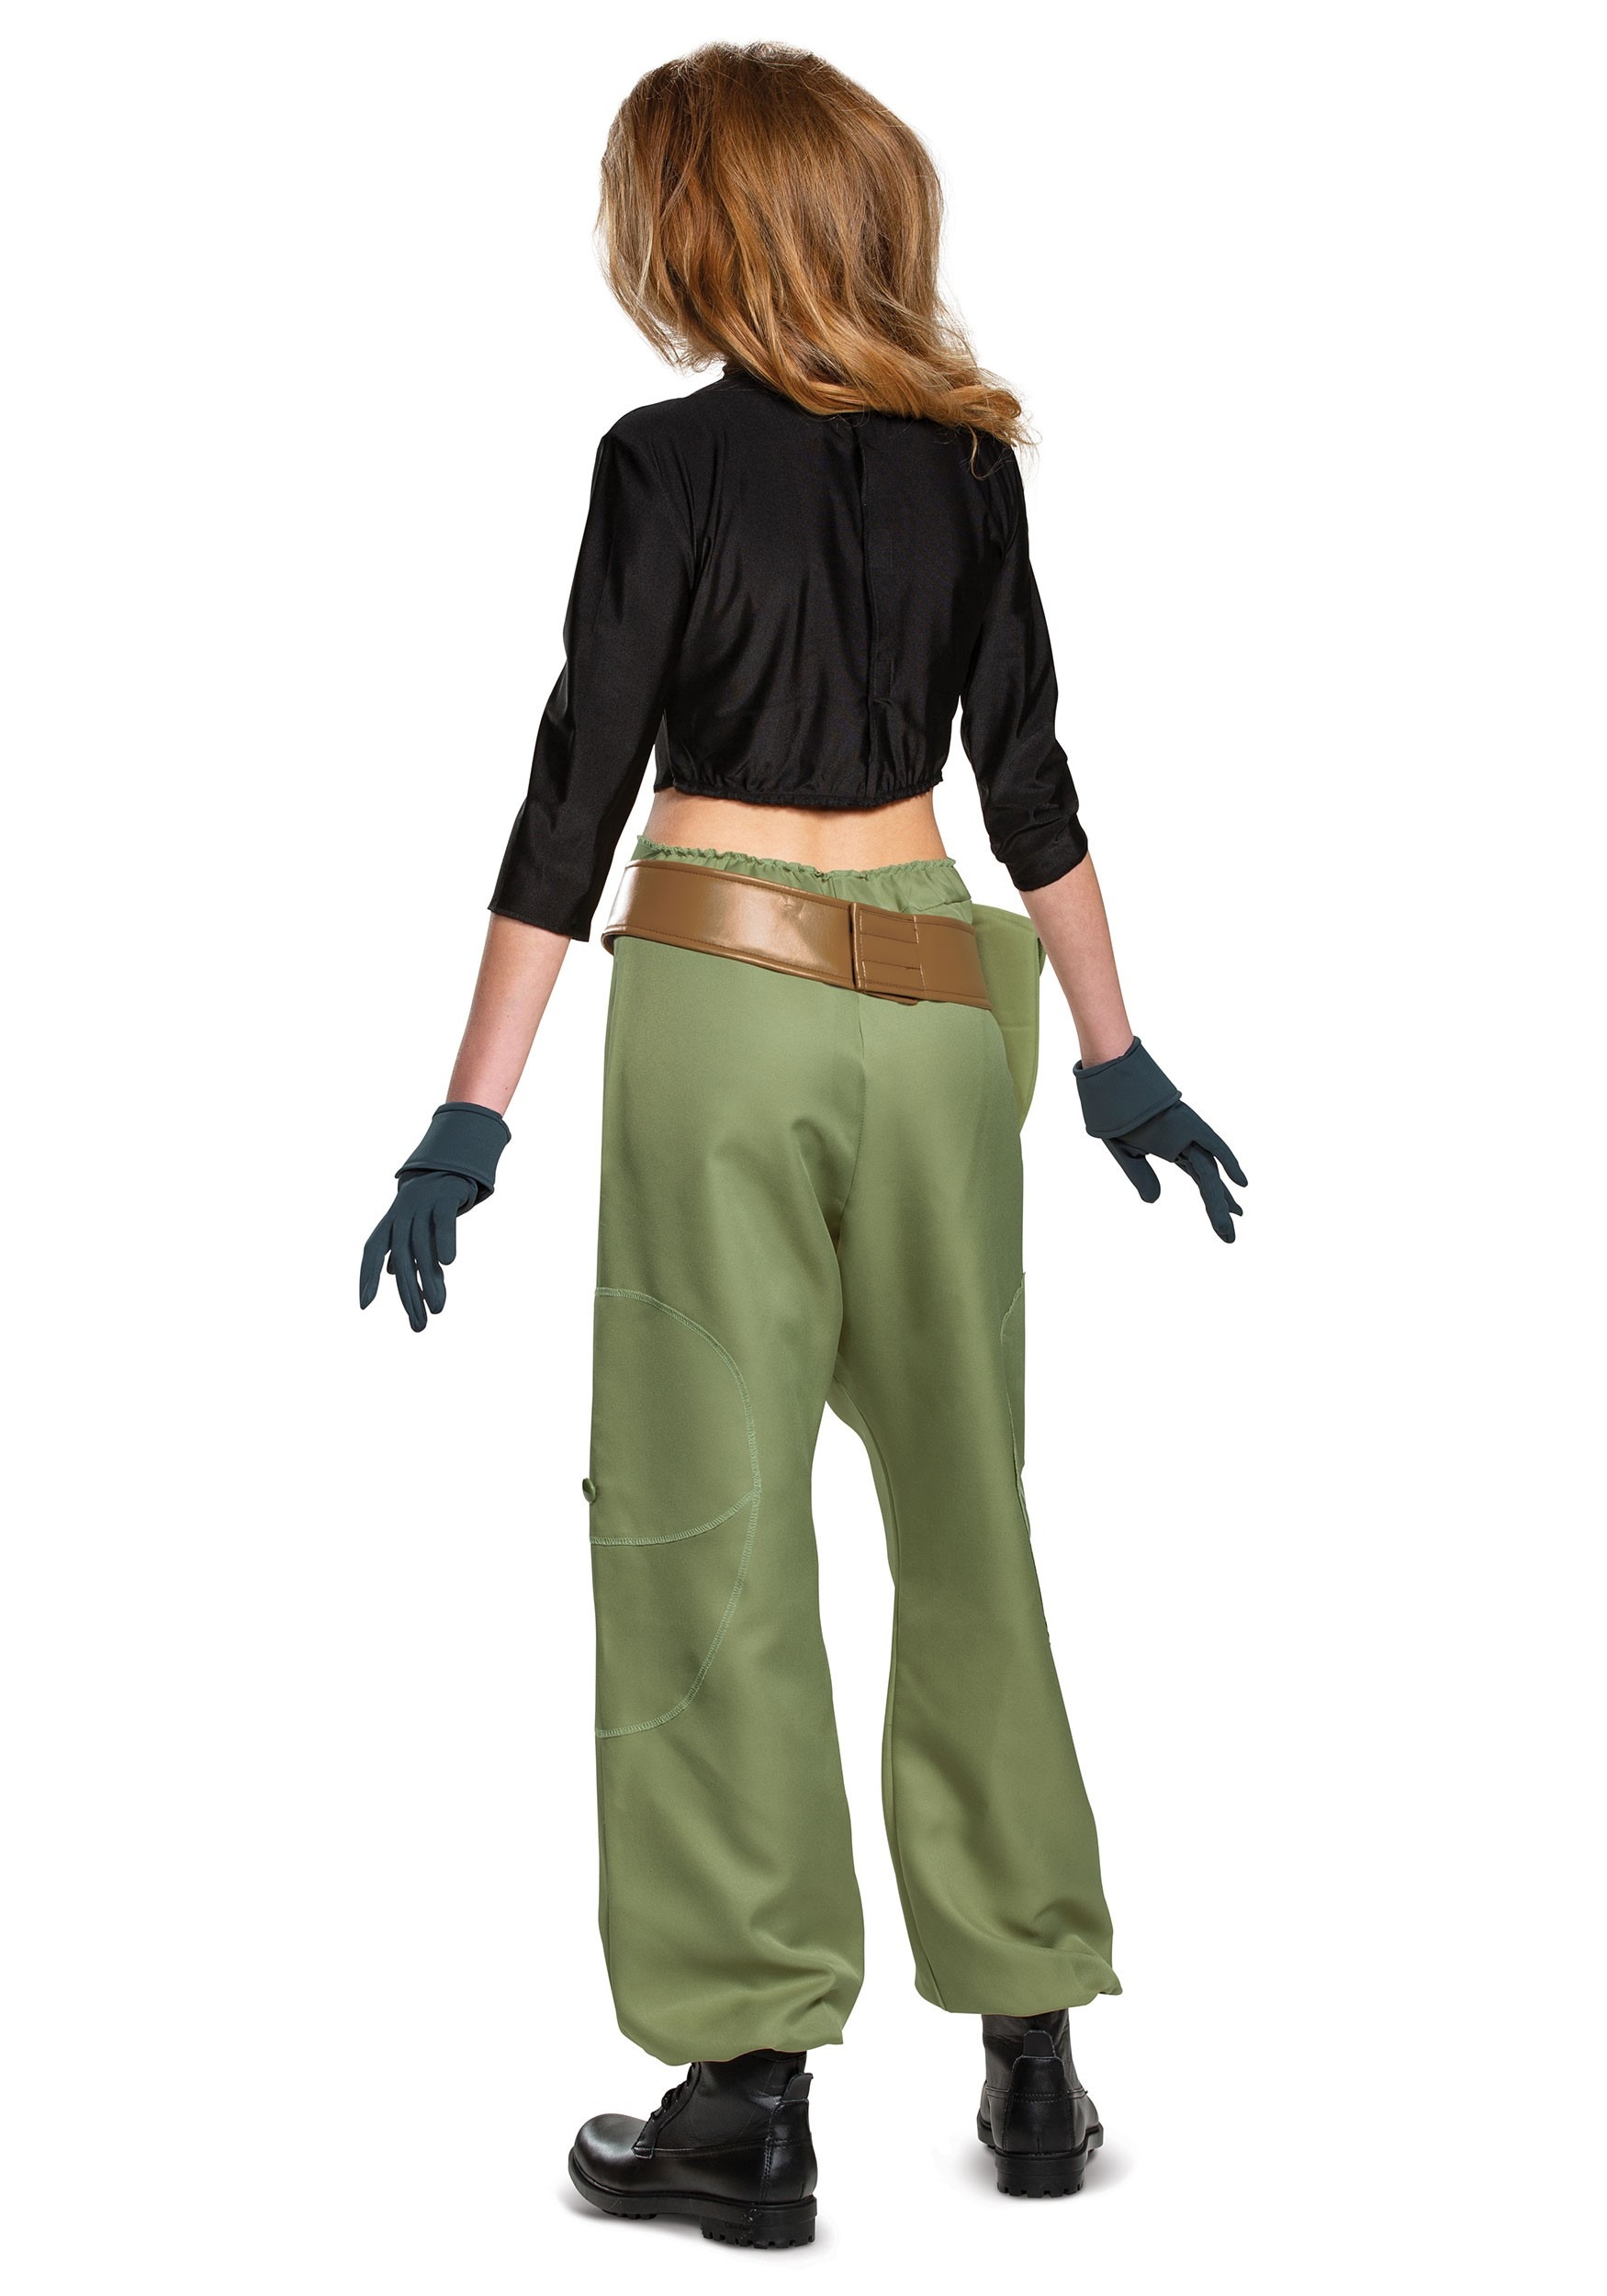 Kim Possible Animated Series Kim Possible Costume For Women